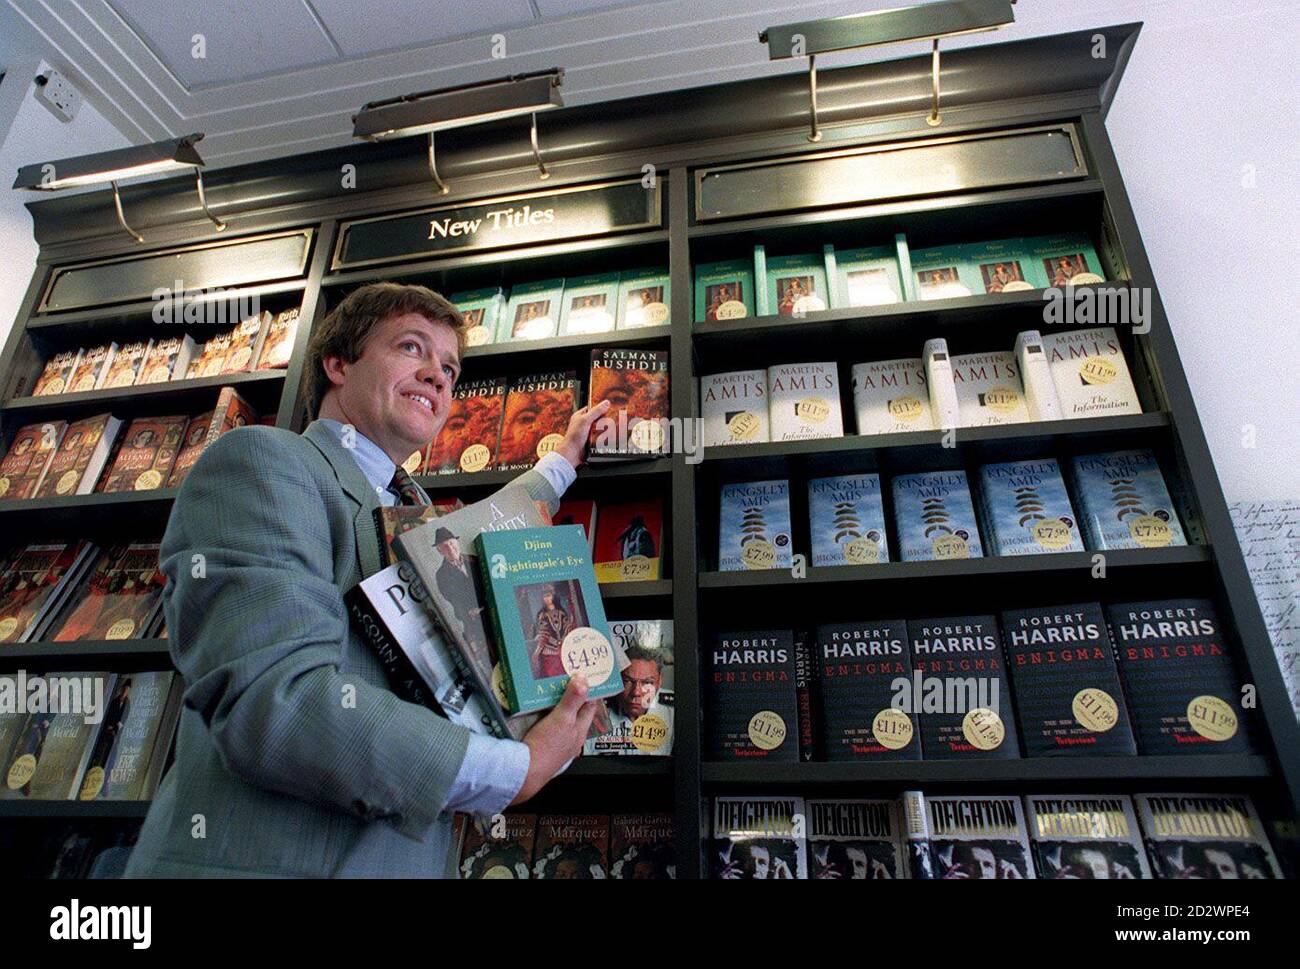 Alan Giles, Managing Director of Waterstone's, stocking the shelves of his chain's branch in Notting Hill, London, today (Sunday) with books on a selected list of current bestsellers chosen to be sold at reduced prices. The move comes shortly after the virtual collapse of the Net Book Agreement which fixed the price of books at artificial levels. Stock Photo